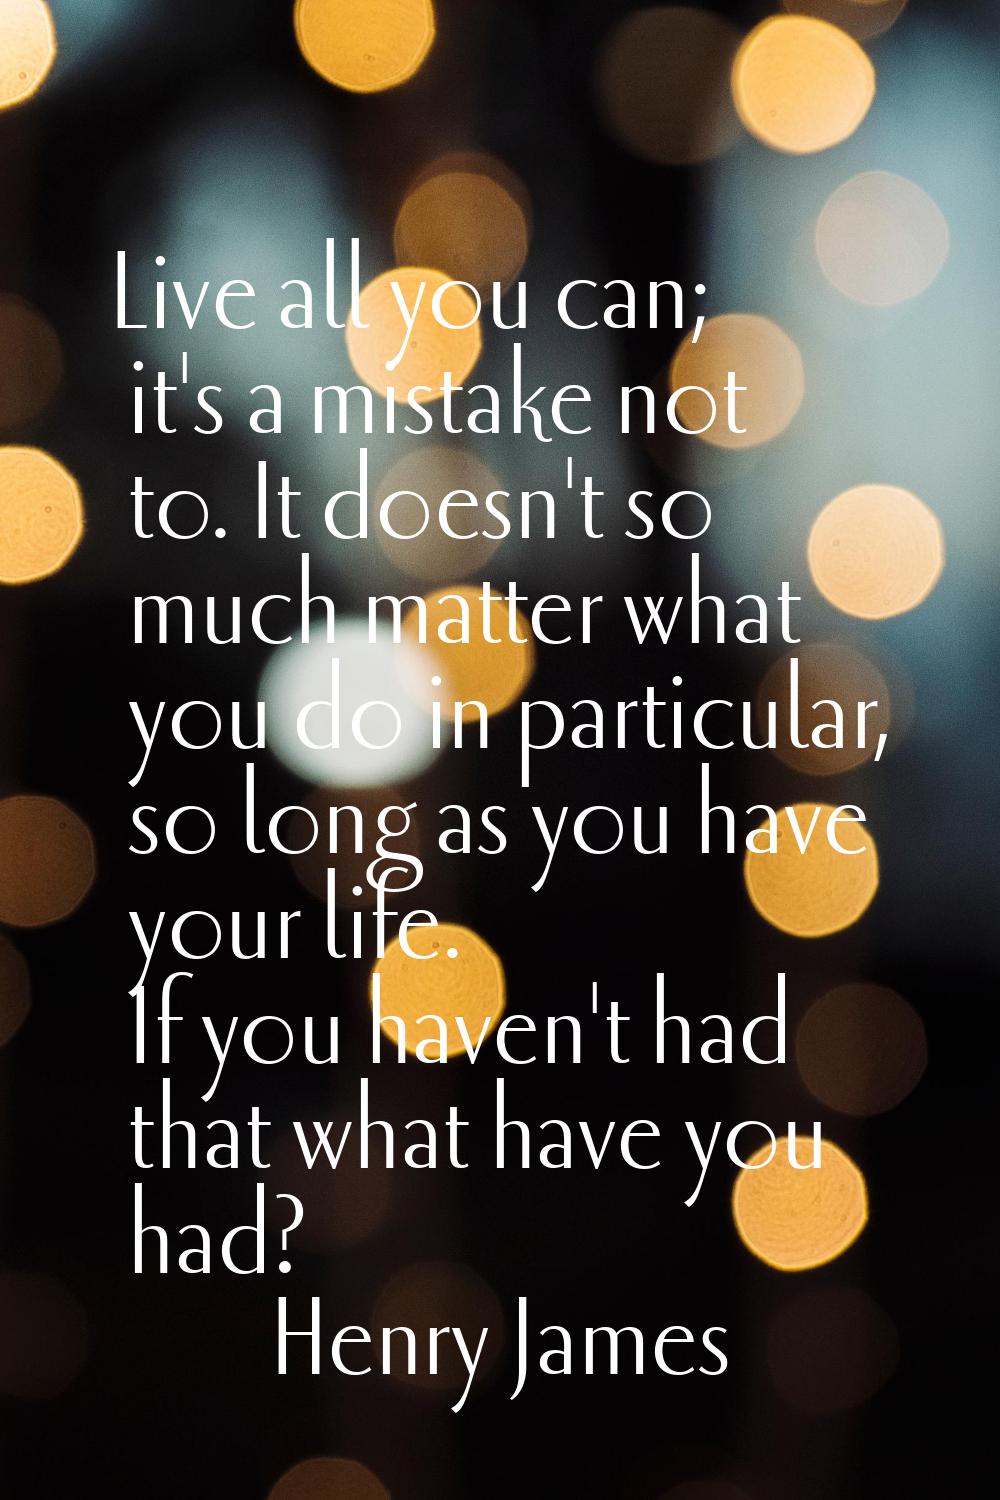 Live all you can; it's a mistake not to. It doesn't so much matter what you do in particular, so lo